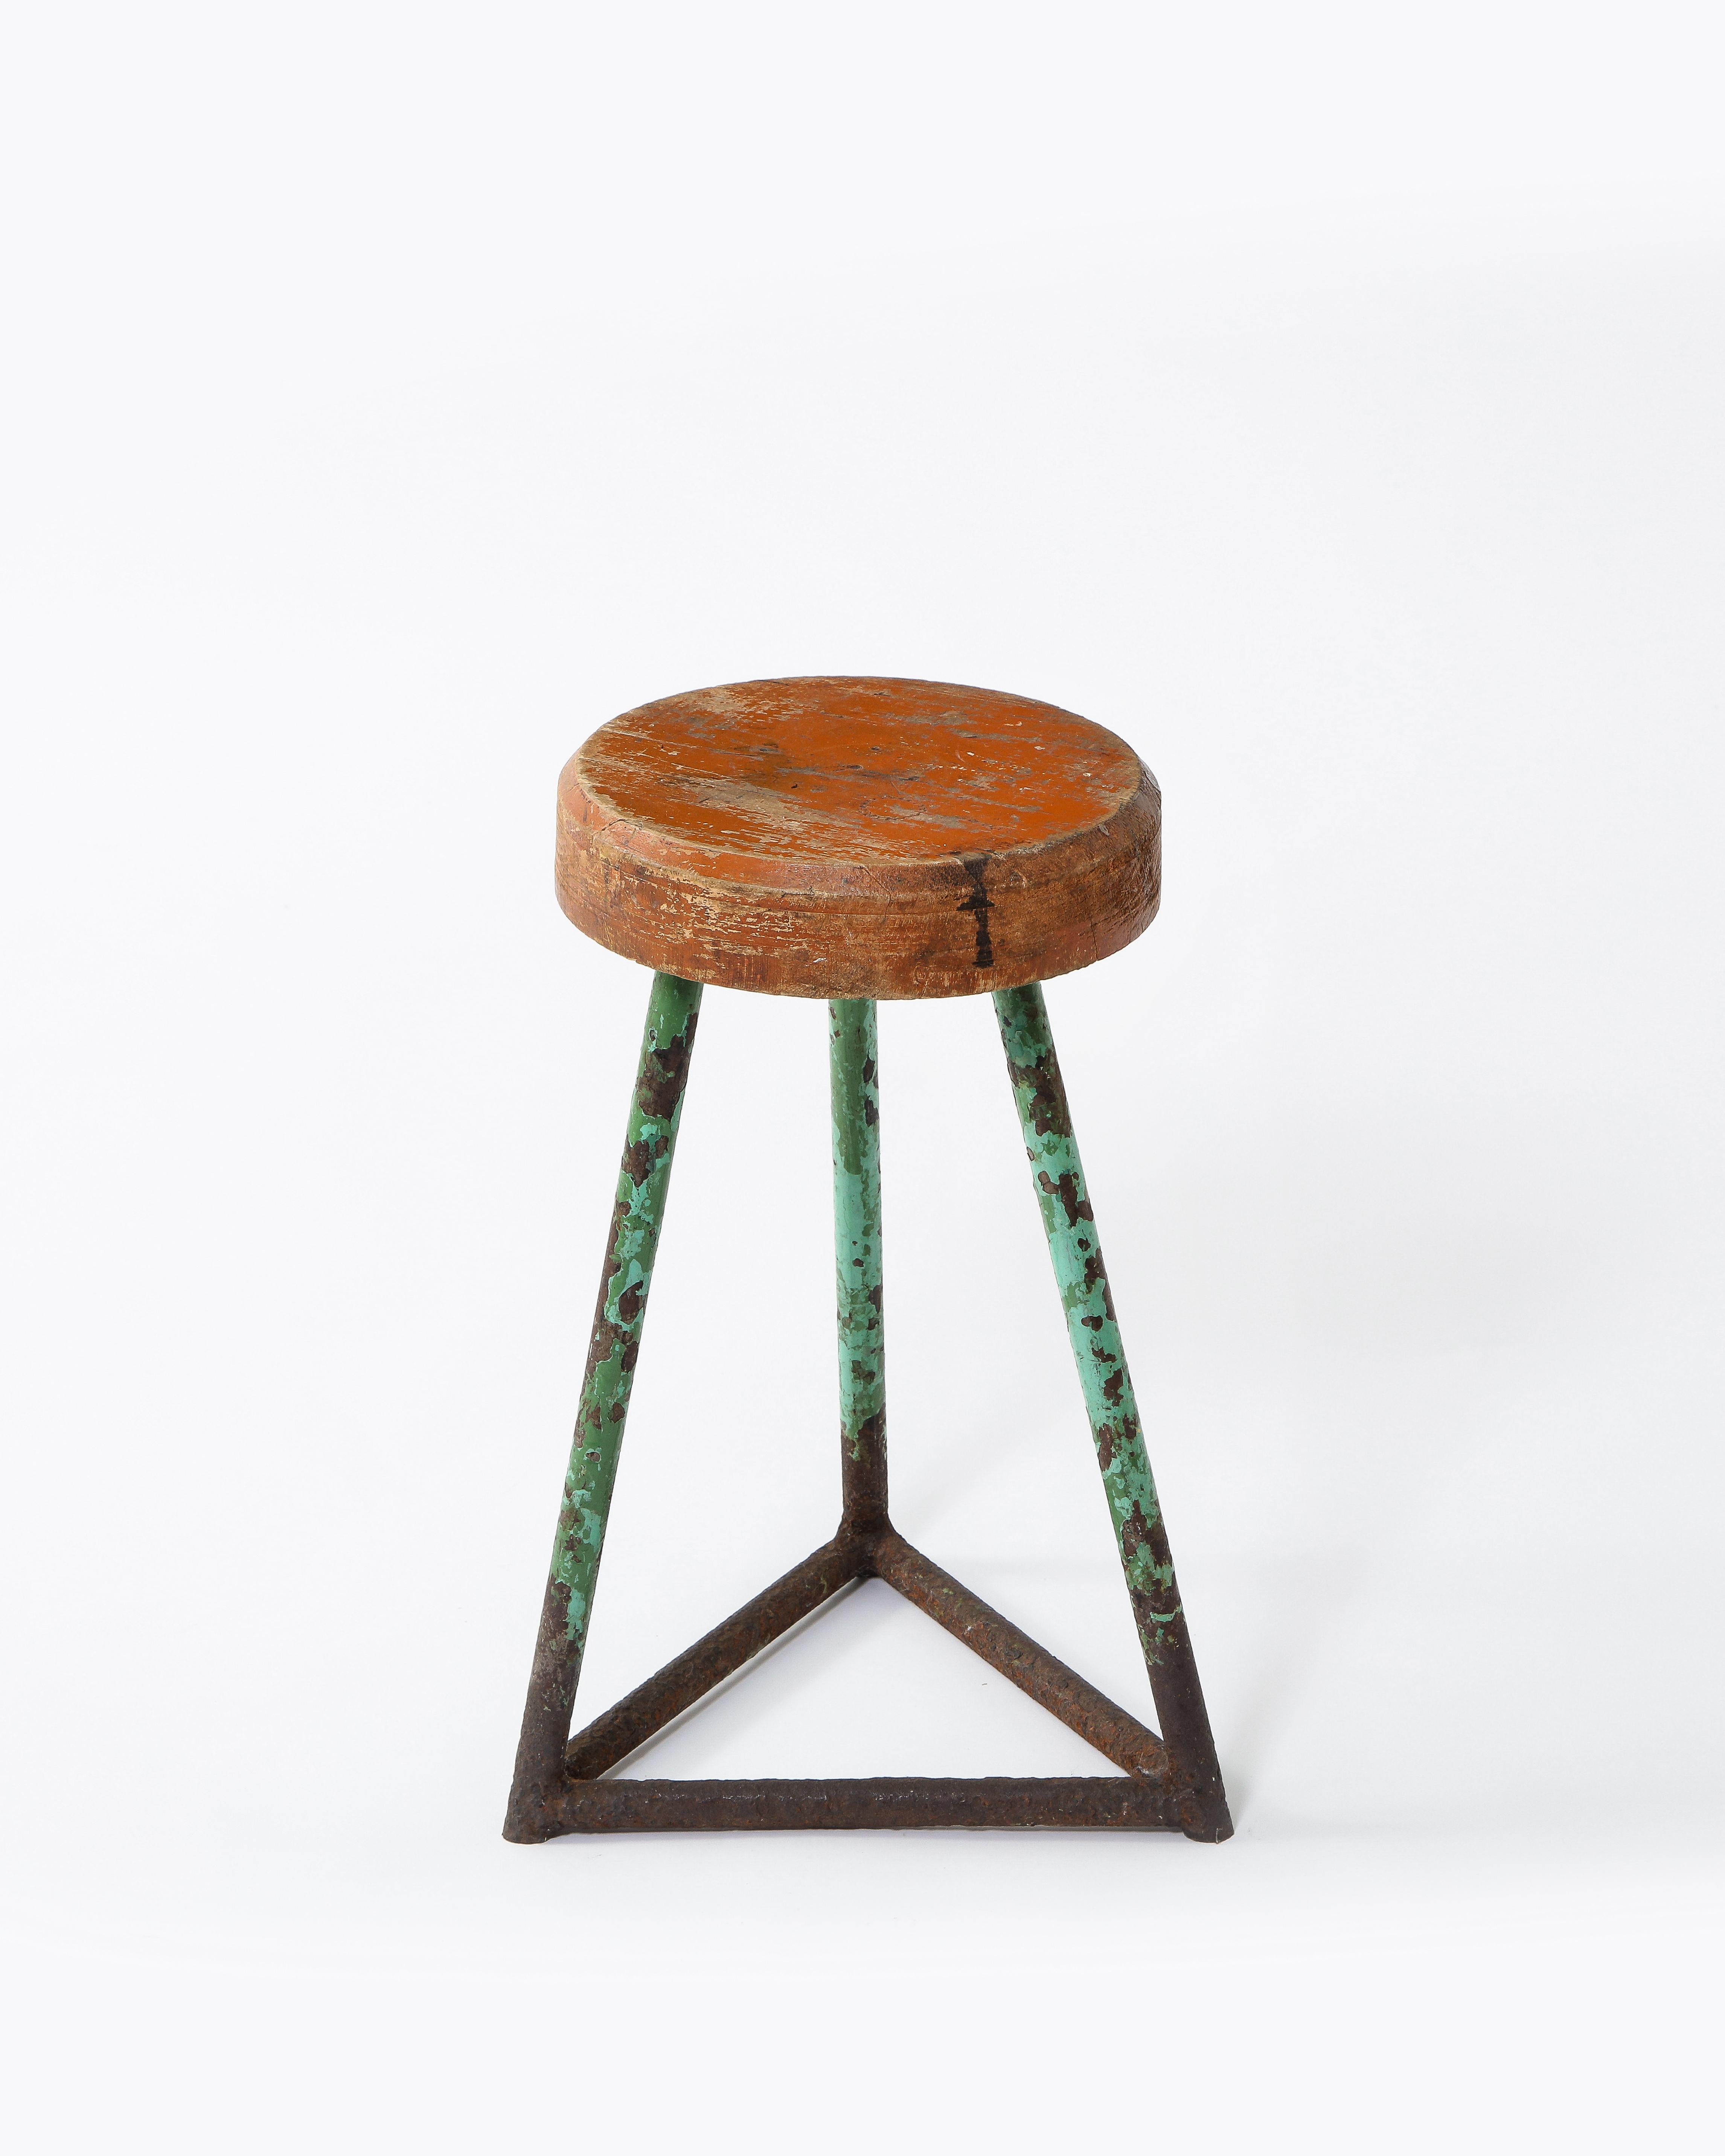 Vintage Industrial Wood and Metal Stool, Heavy Patina, Belgium 1960's For Sale 2